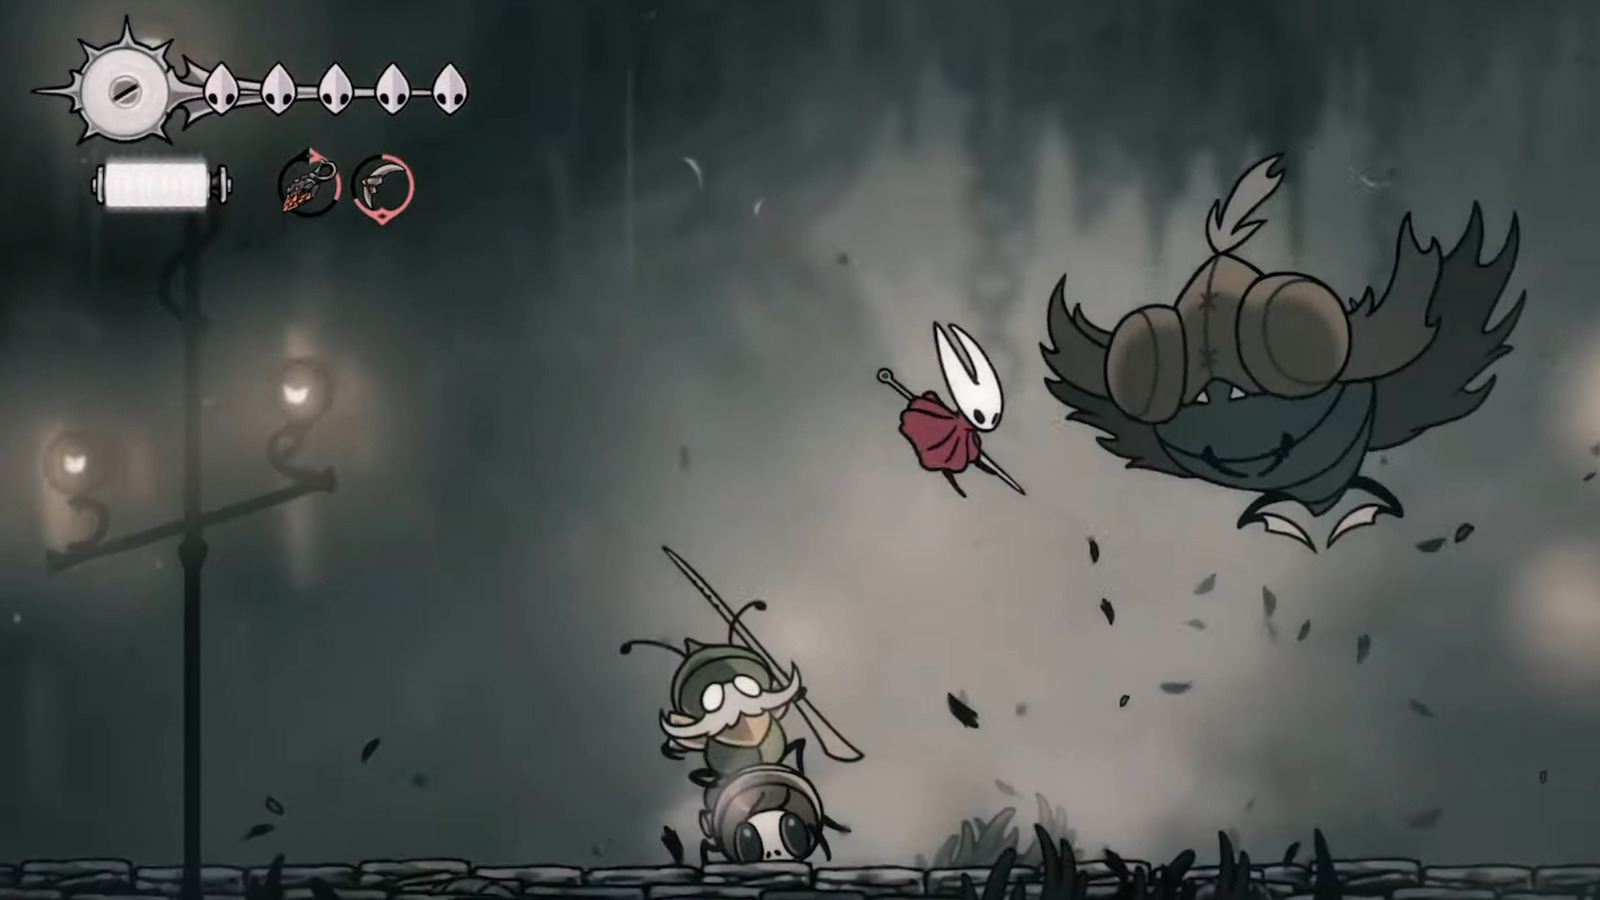 Verwant Pretentieloos Aanstellen Hollow Knight: Silksong Reappears With An Xbox Game Pass Surprise